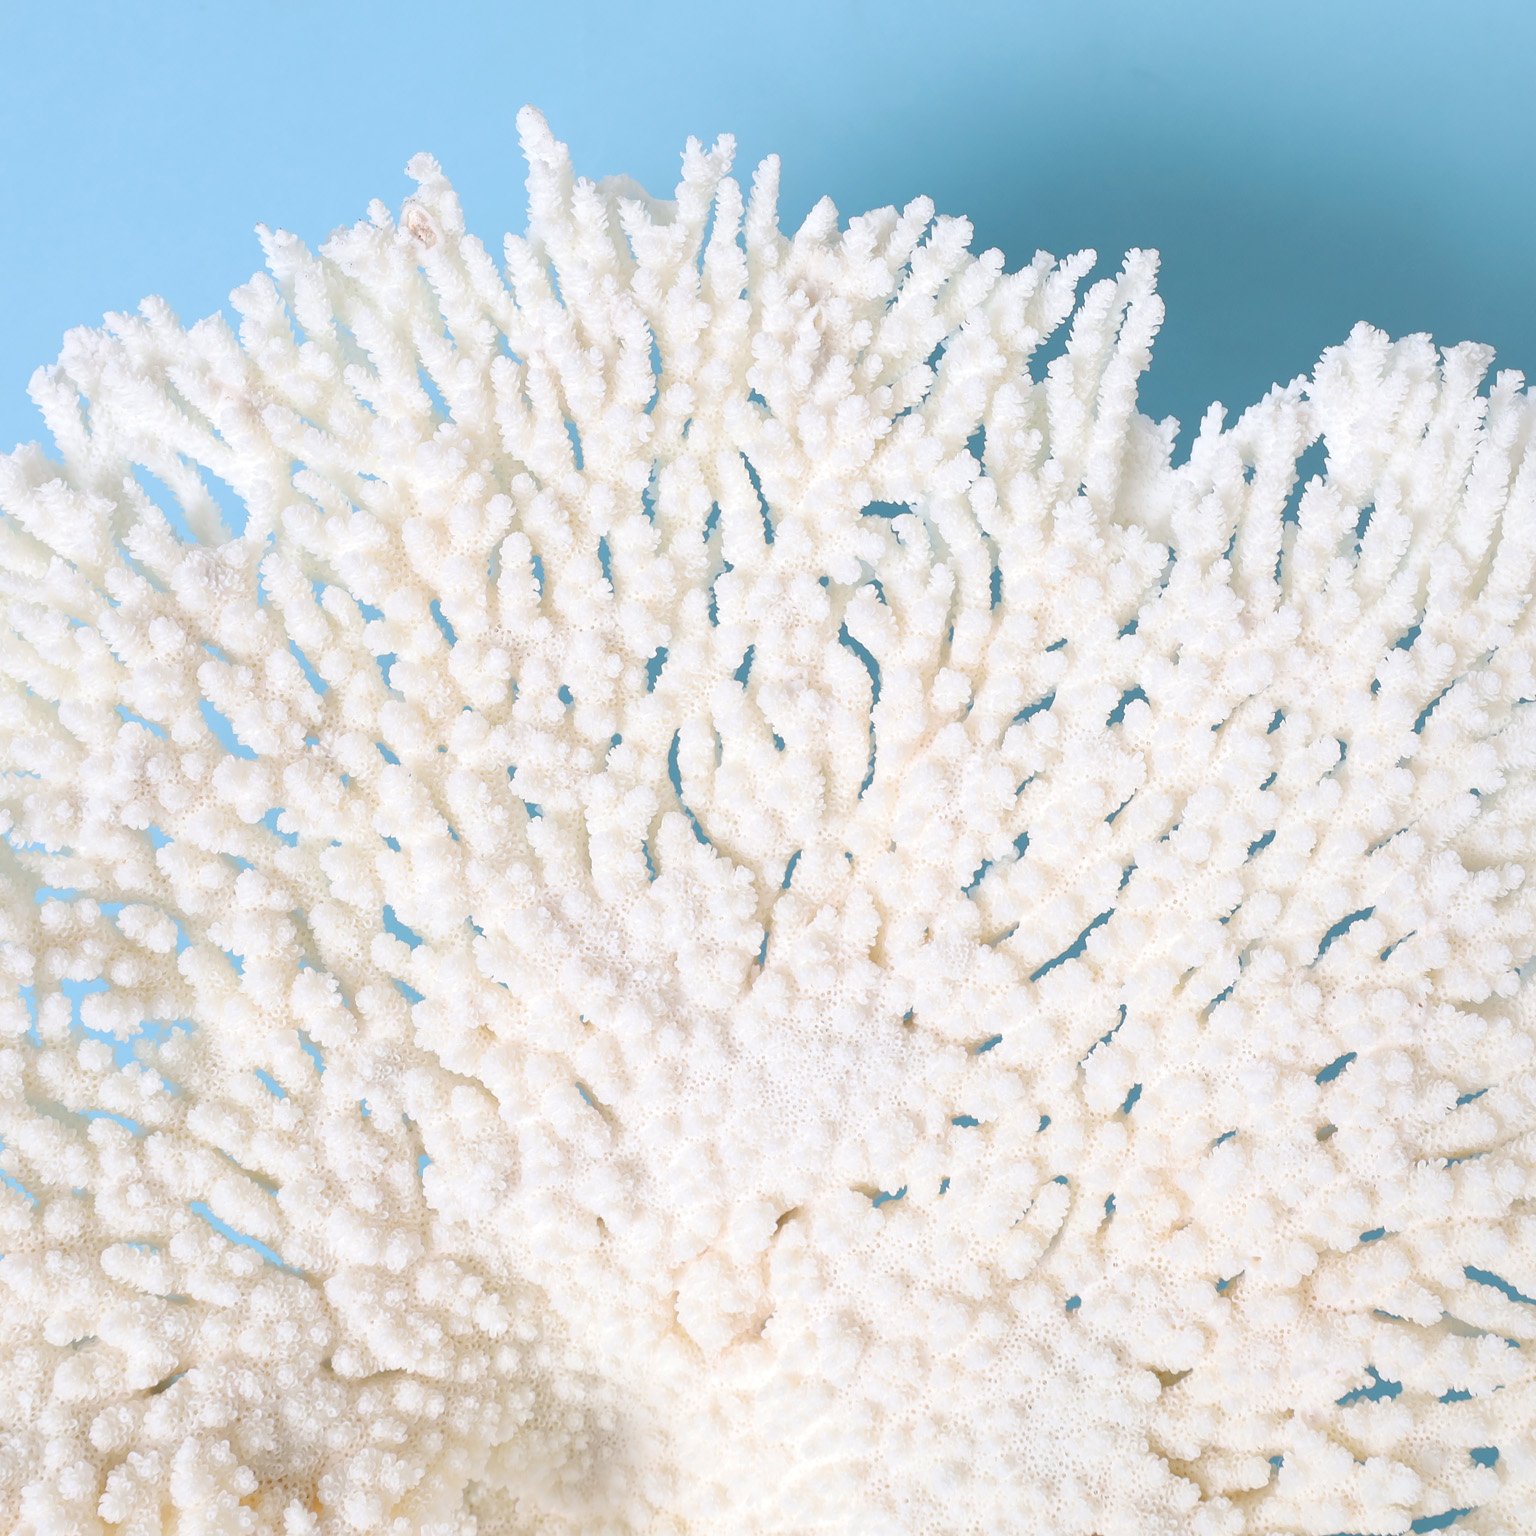 Large White Table Coral Sculpture on Lucite